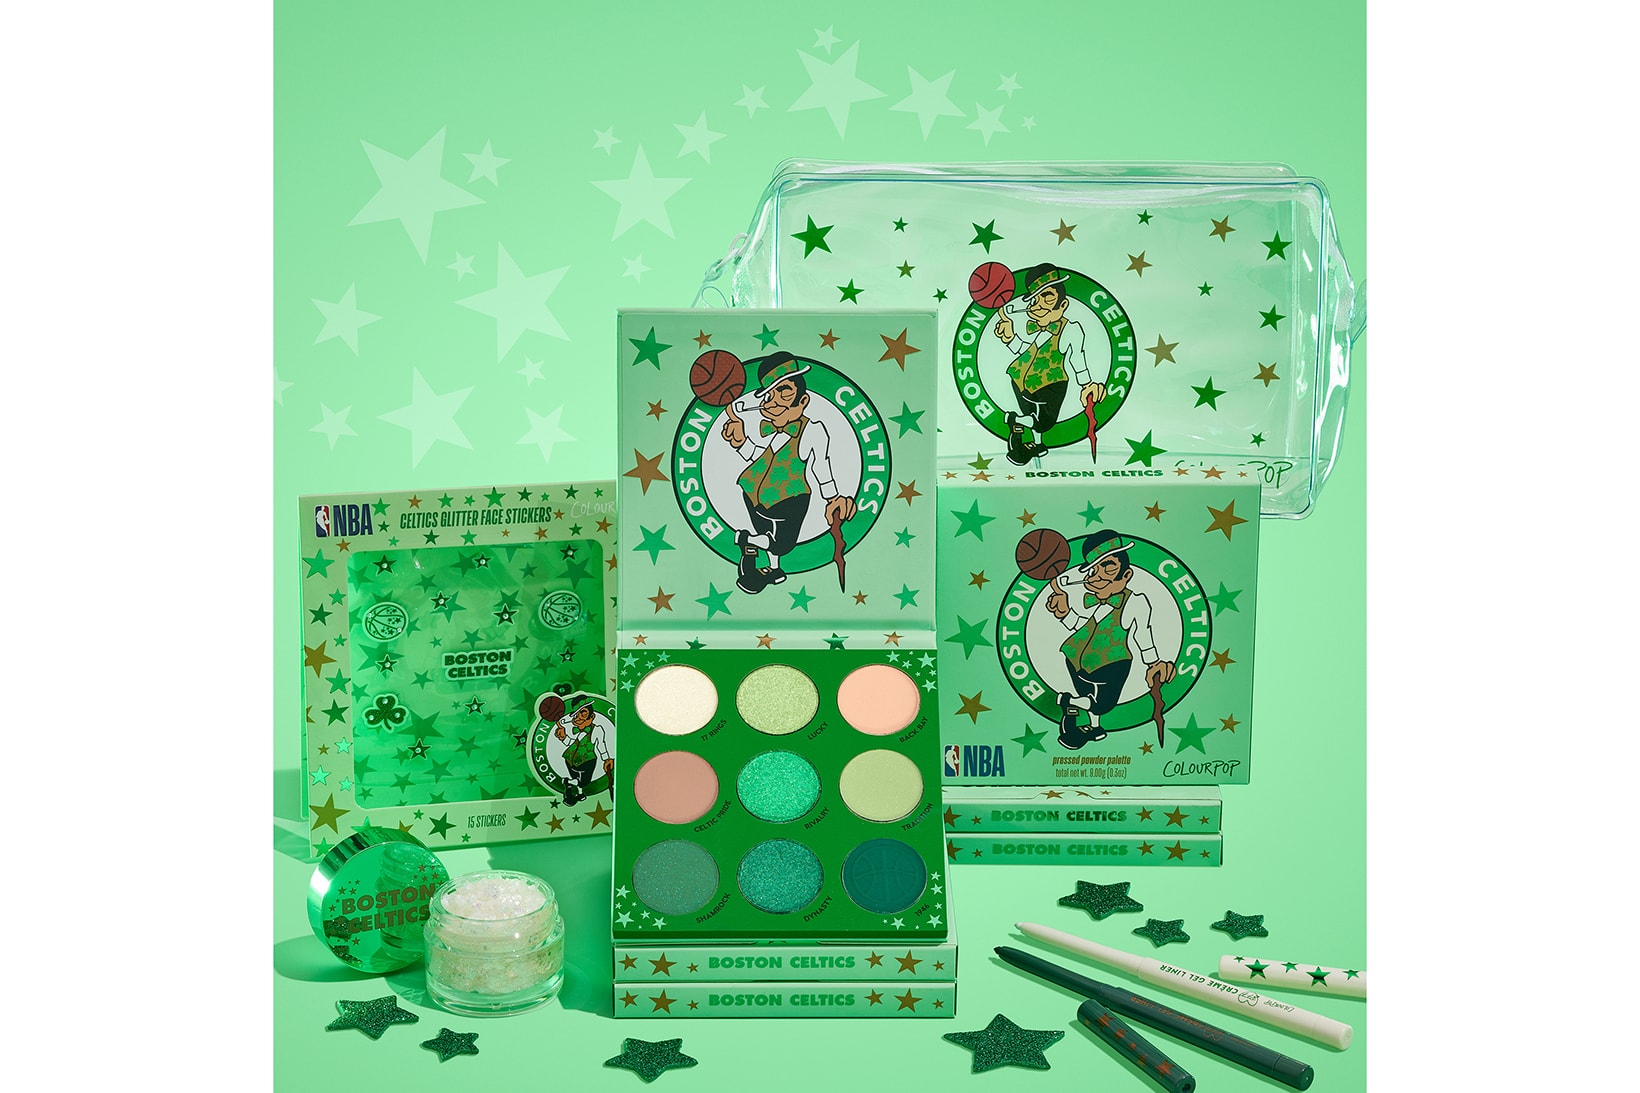 NBA ColourPop Cosmetics Makeup Collection Collaboration Beauty Eyeshadow Palettes Boston Celtics Eyeliners Bags Face Gels Stickers